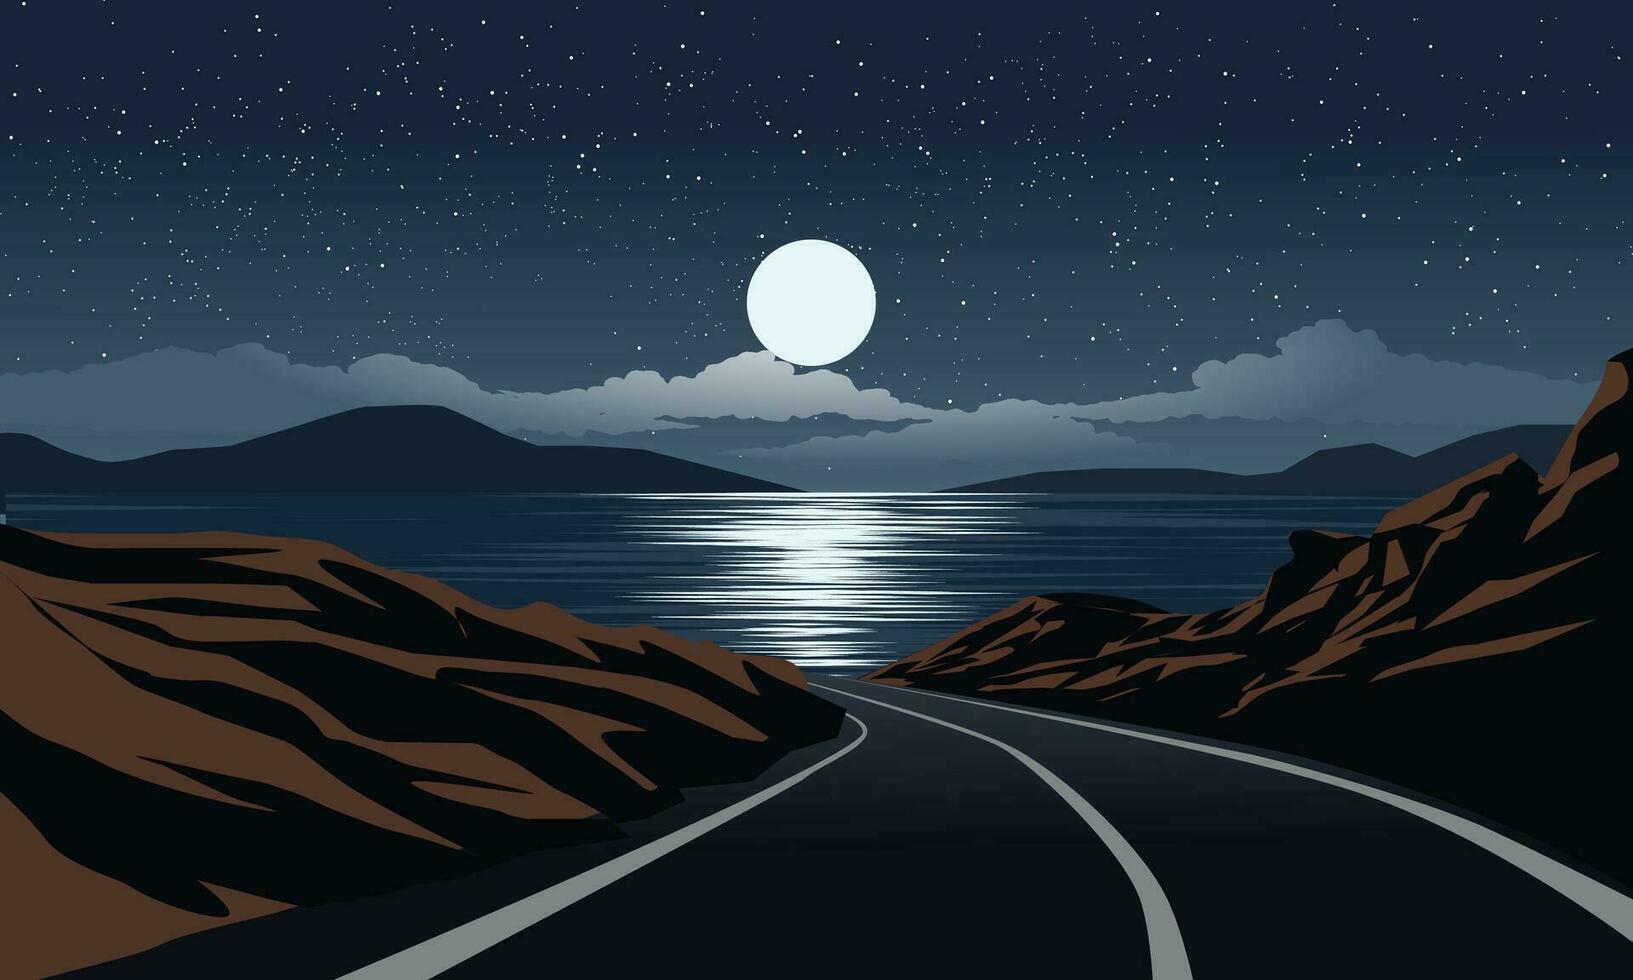 Nighttime landscape with lake, road, hill, moon and star vector